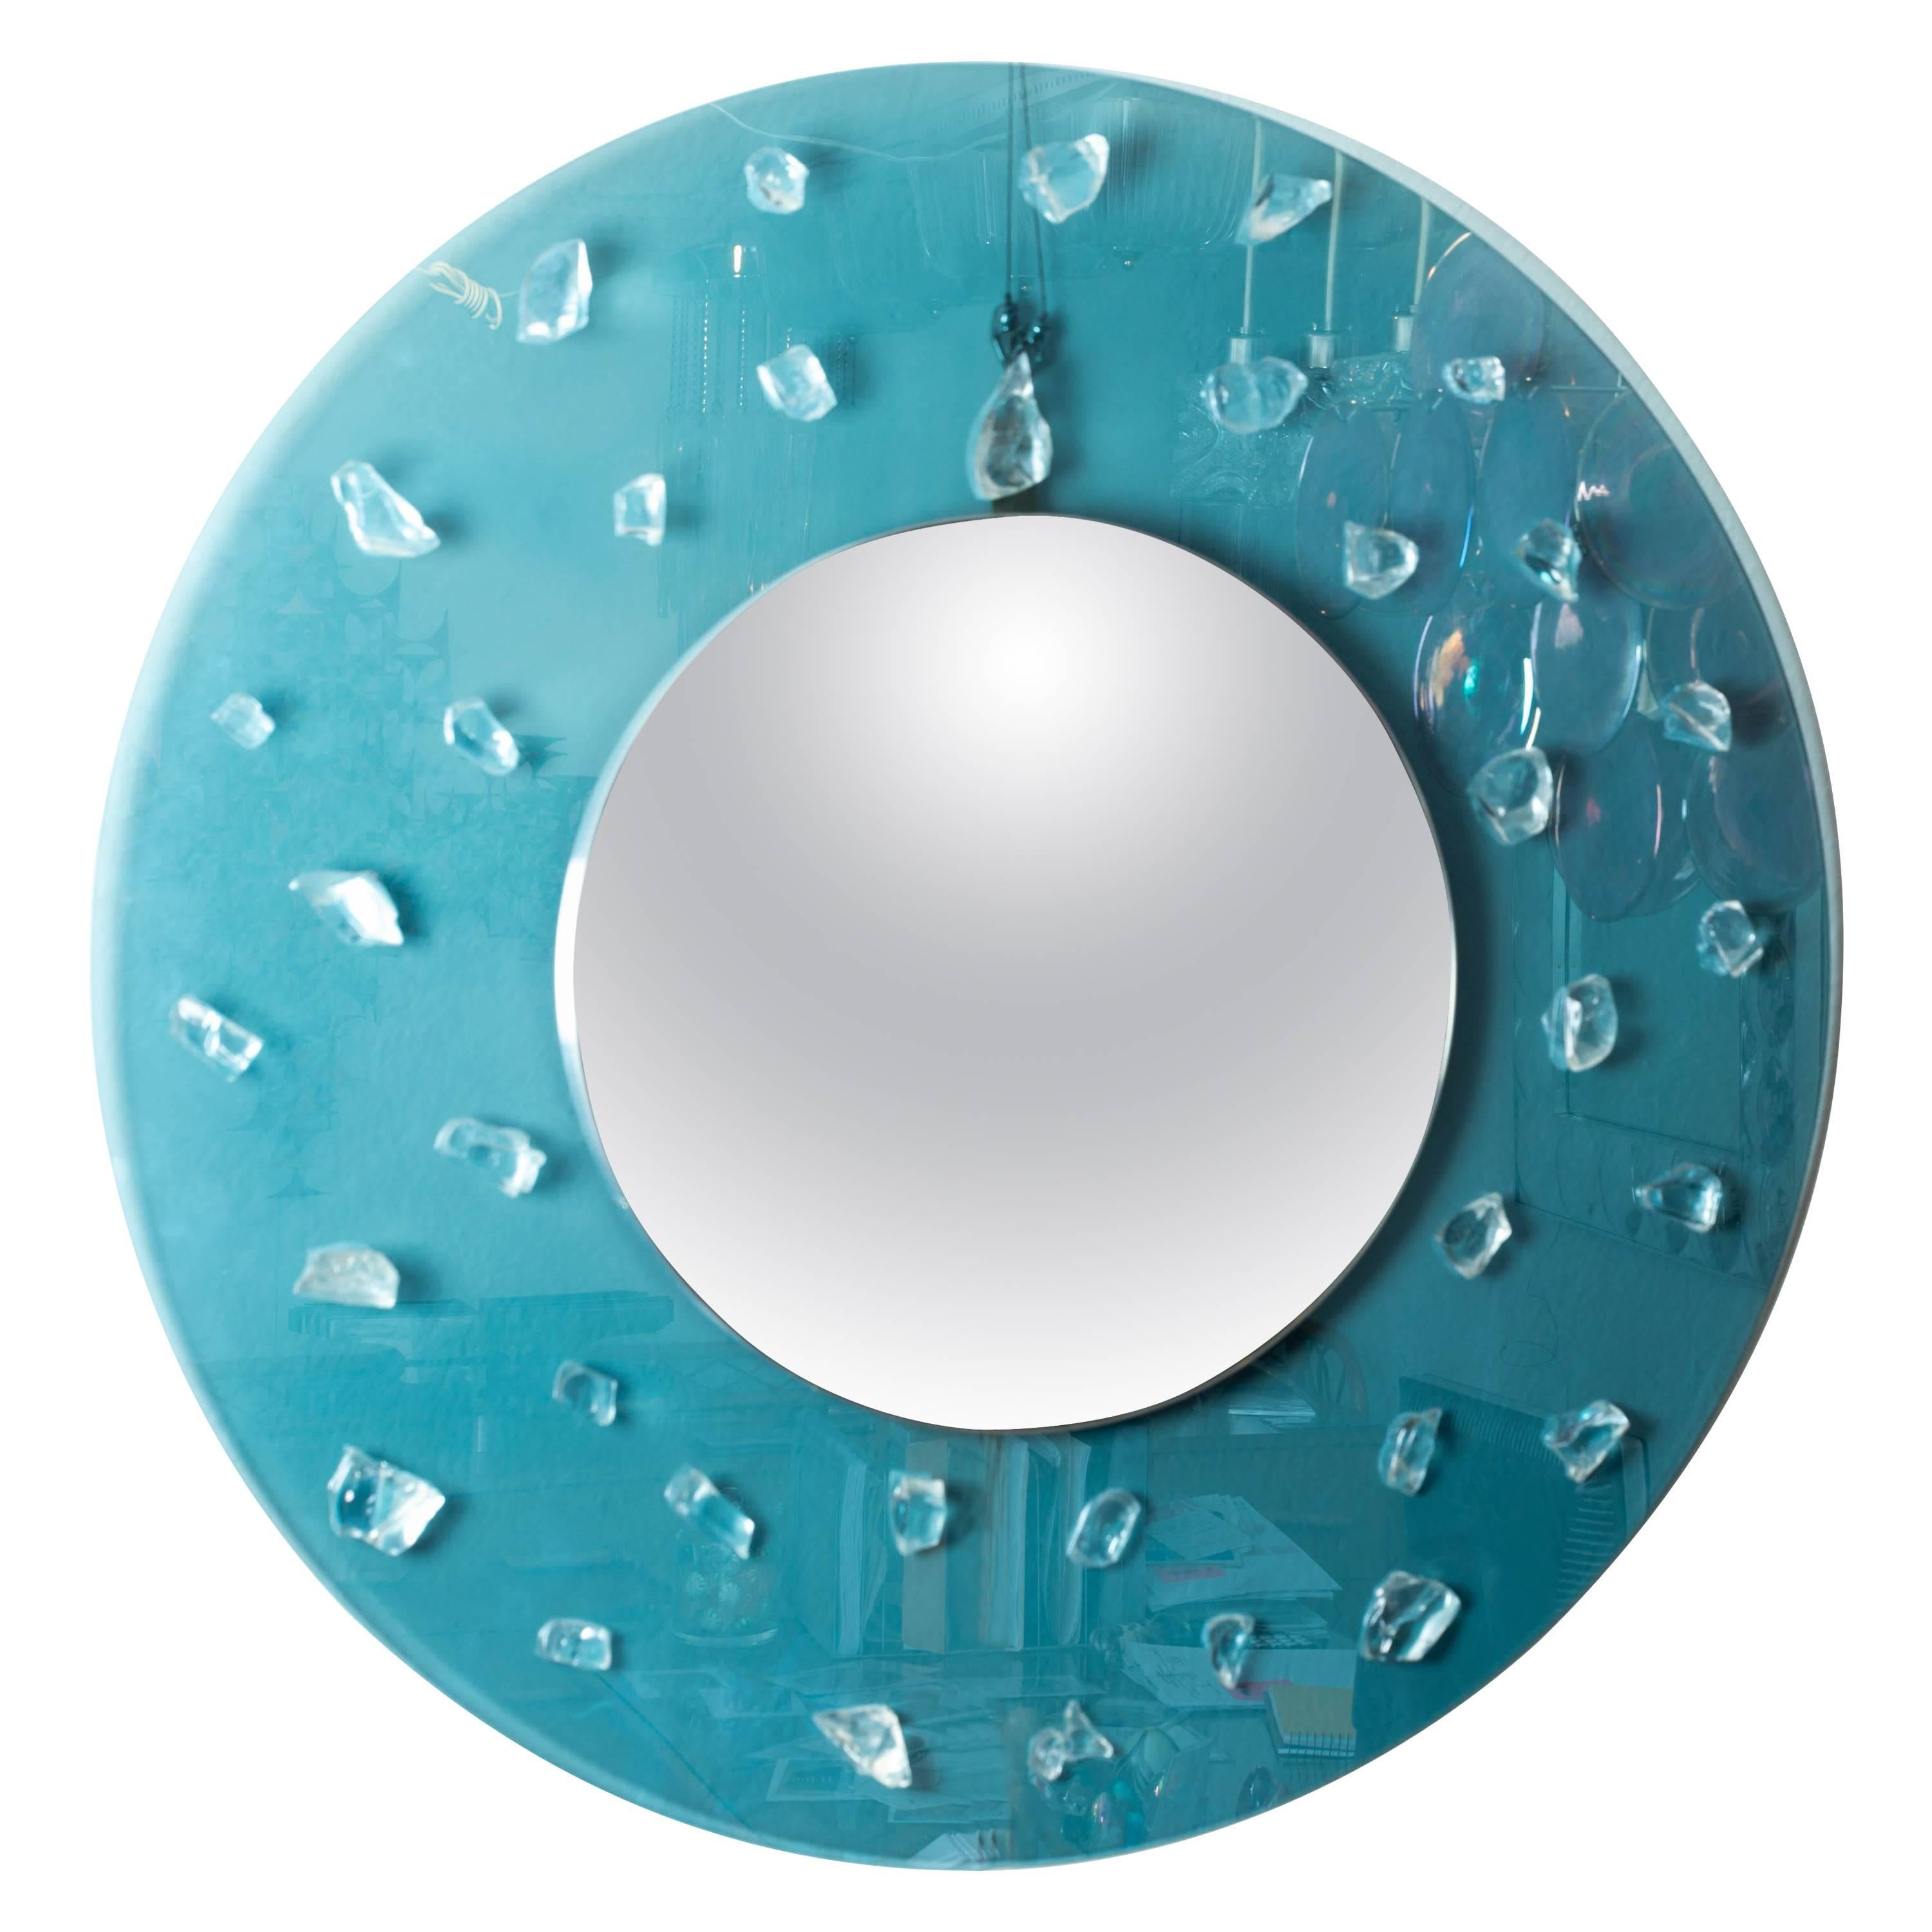 Circular Blue Glass Surround Mirror with Applied Glass Fragments